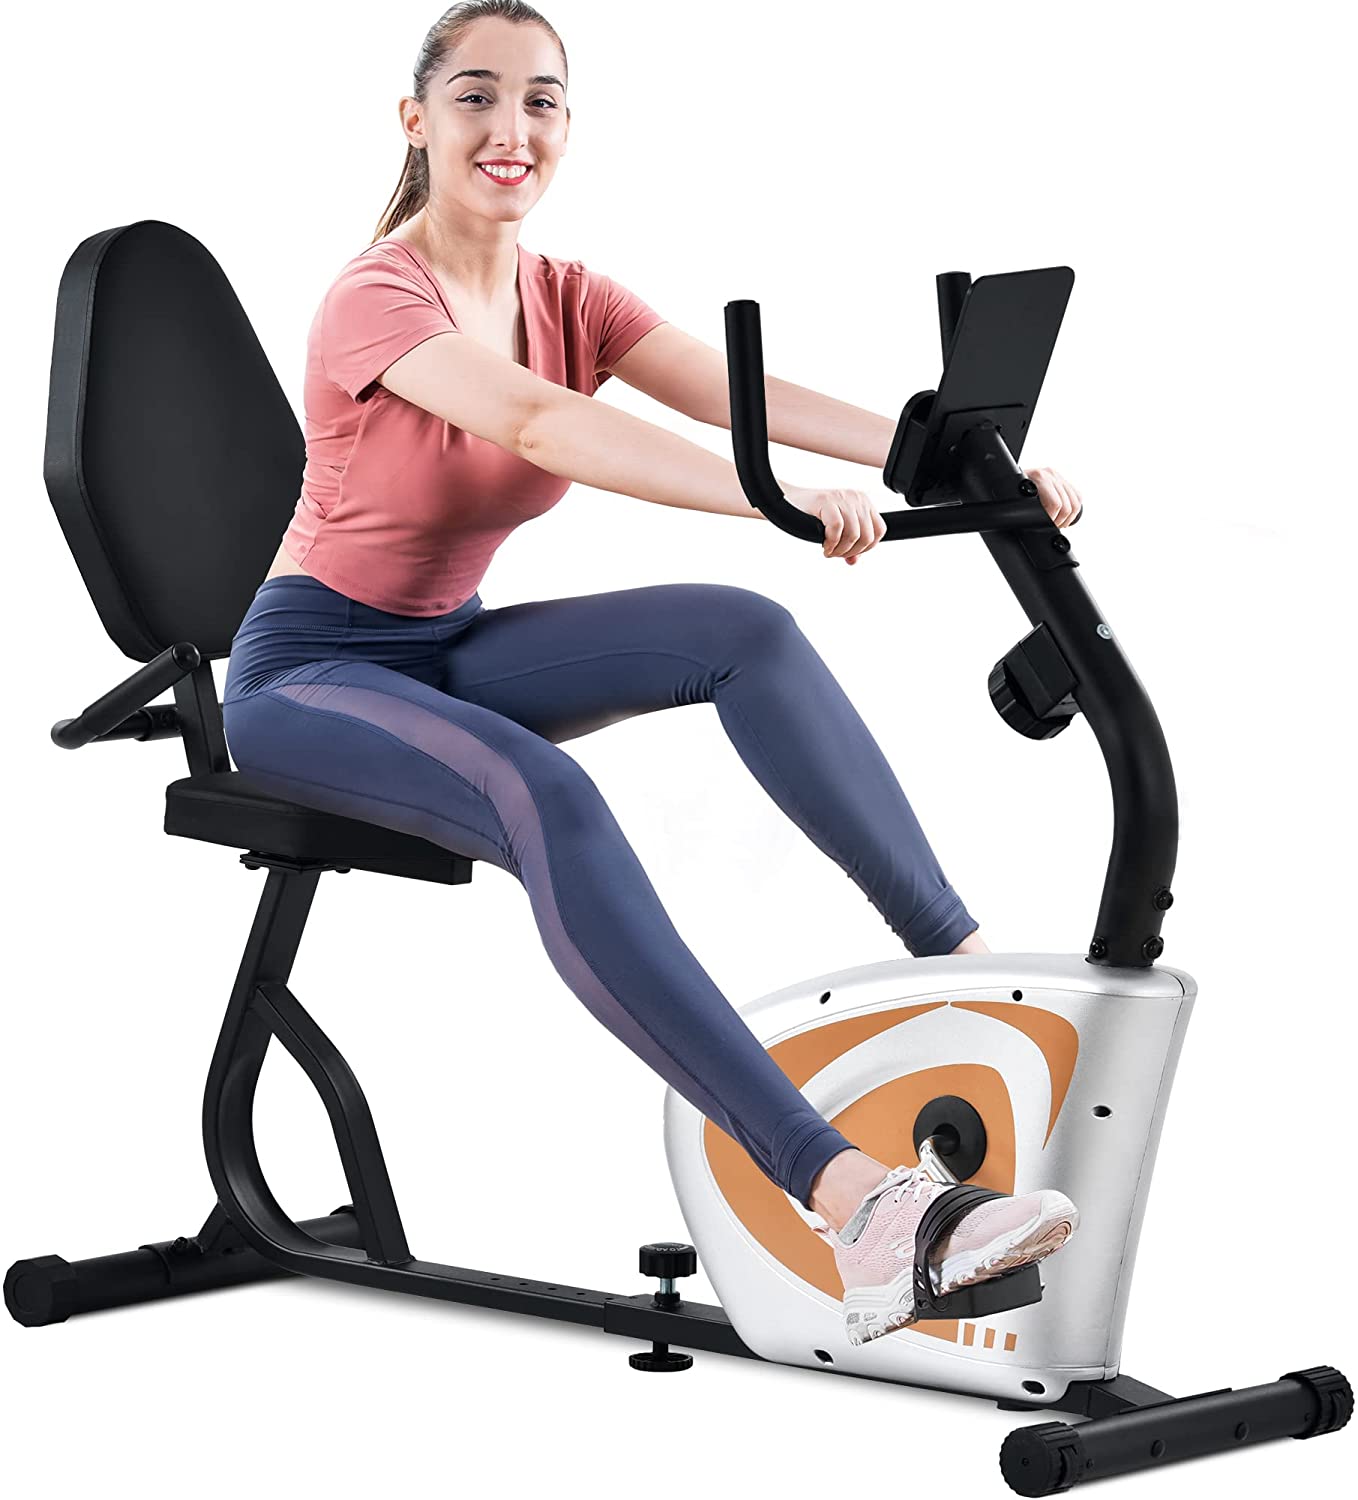 YY Style Indoor Recumbent Exercise Bike with Wheel, Stationary Exercise Bike with LCD and Bluetooth Monitor, Fitness Exercise Equipment for Home and Office, 8-level Resistance, 380 Lbs. Capacity, R092 - image 7 of 8